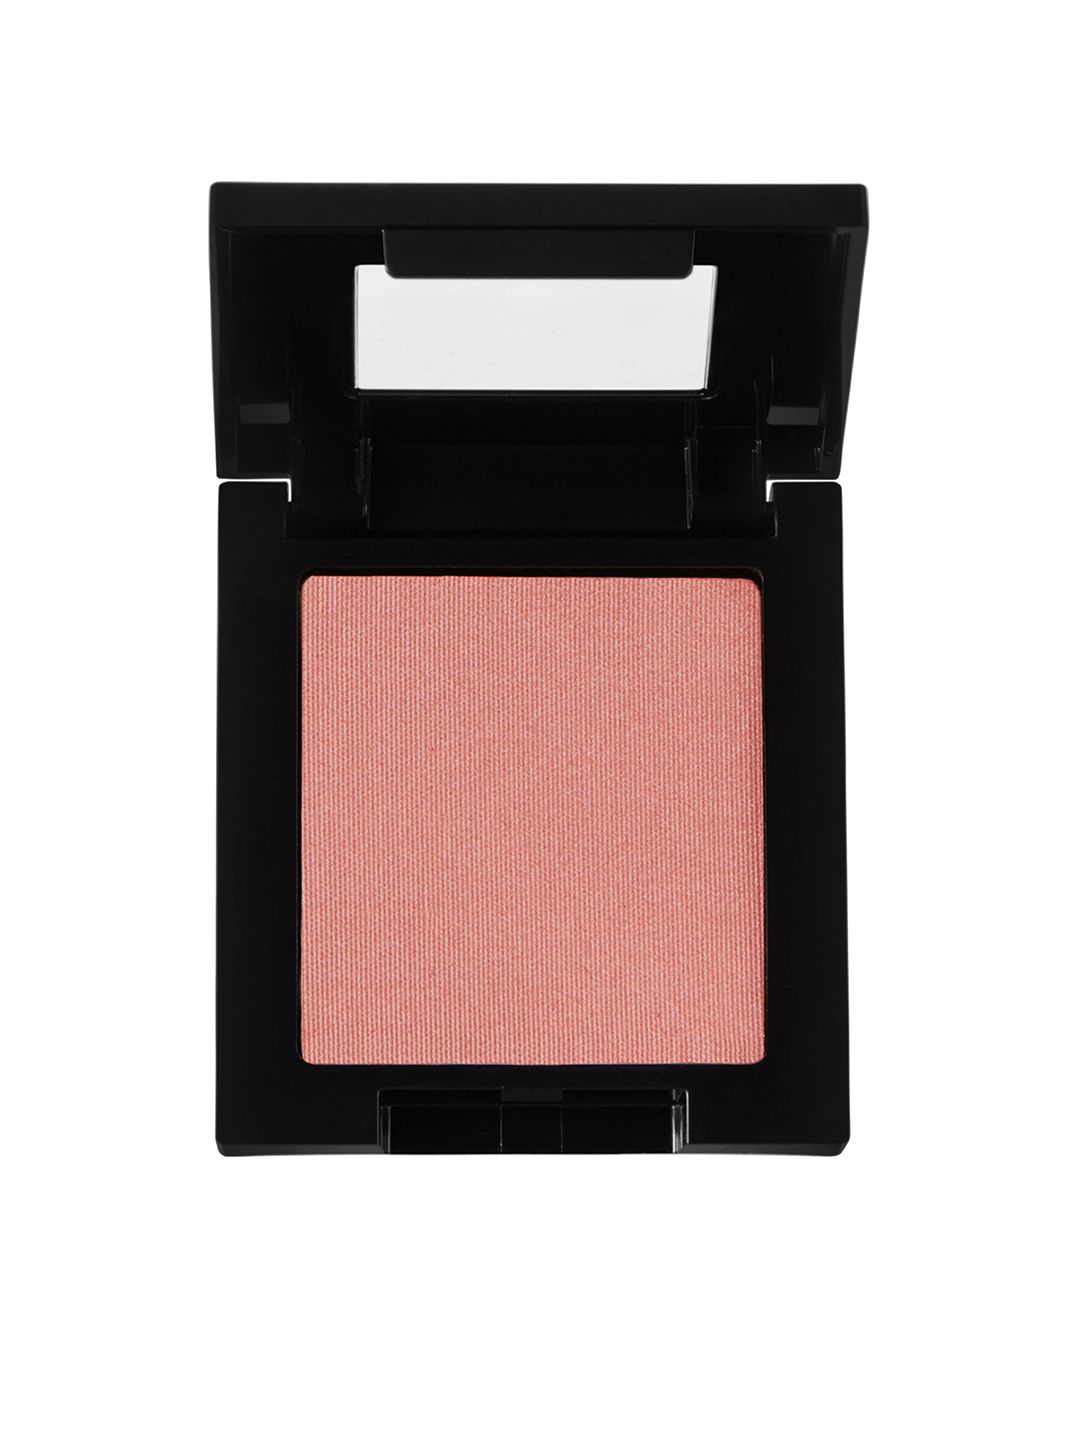 Maybelline New York Fit Me Blush- 16 Rosy Nude